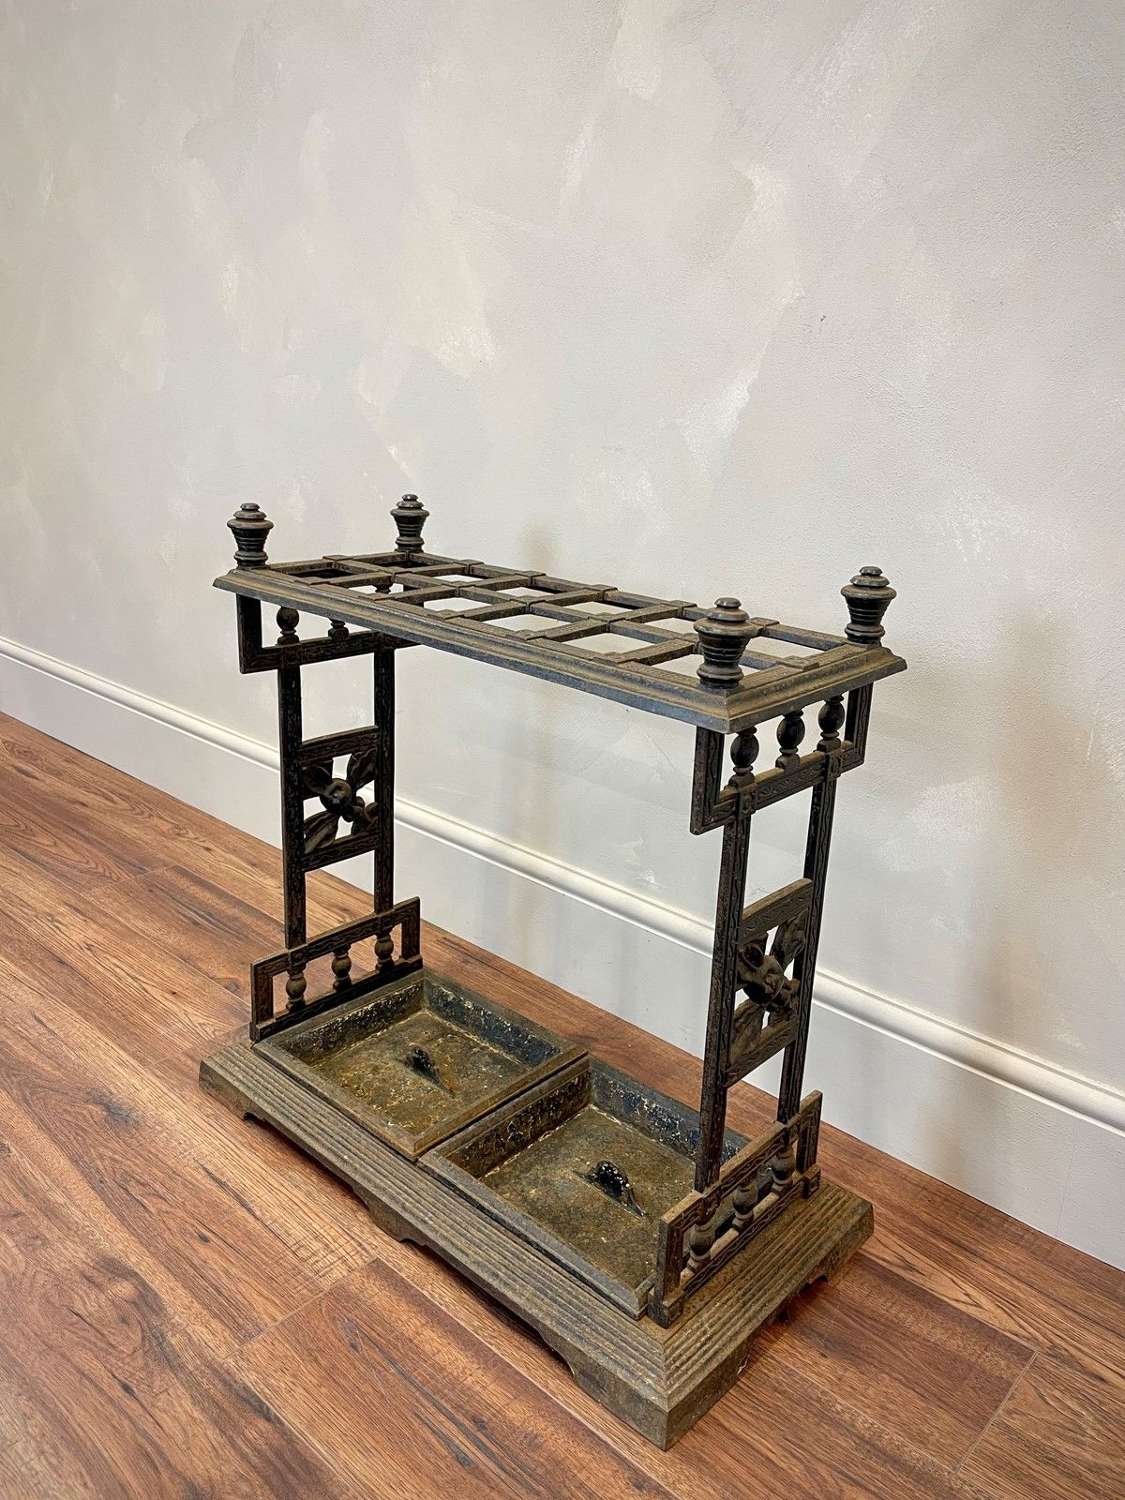 Cast iron stick stand attributed to coalbrookdale